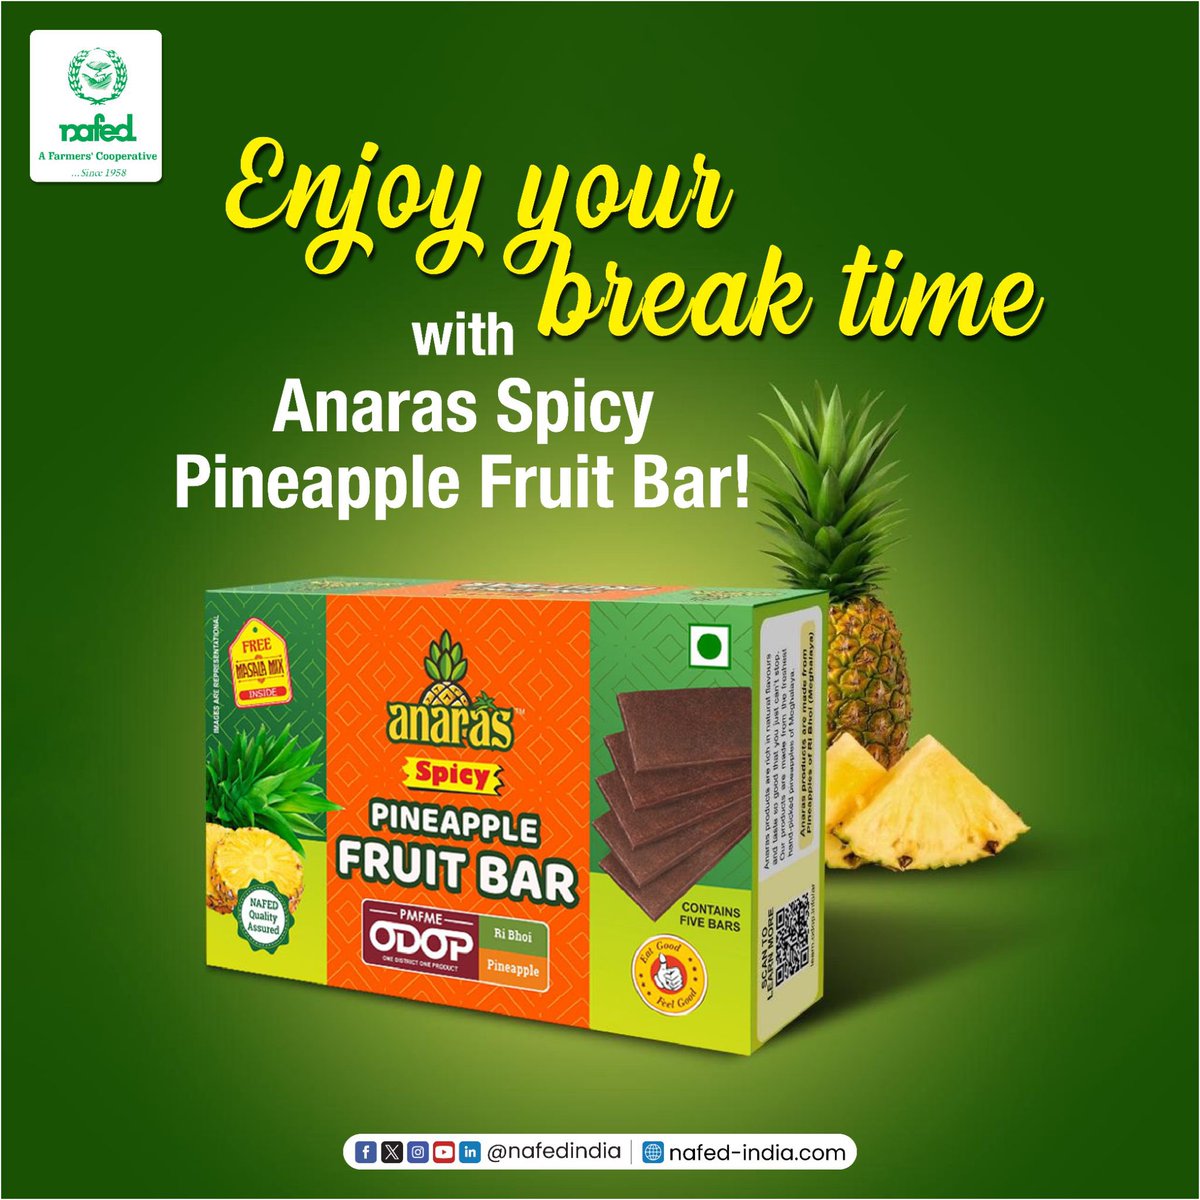 Experience an explosion of taste with every bite. A unique blend of sweet pineapple and zesty spices.
It’s not just a treat - it's packed with vital vitamins and minerals to keep you energized throughout the day.

#NAFEDBazaar #pineapplefruitbar #ODOP #OneDistrictOneProduct